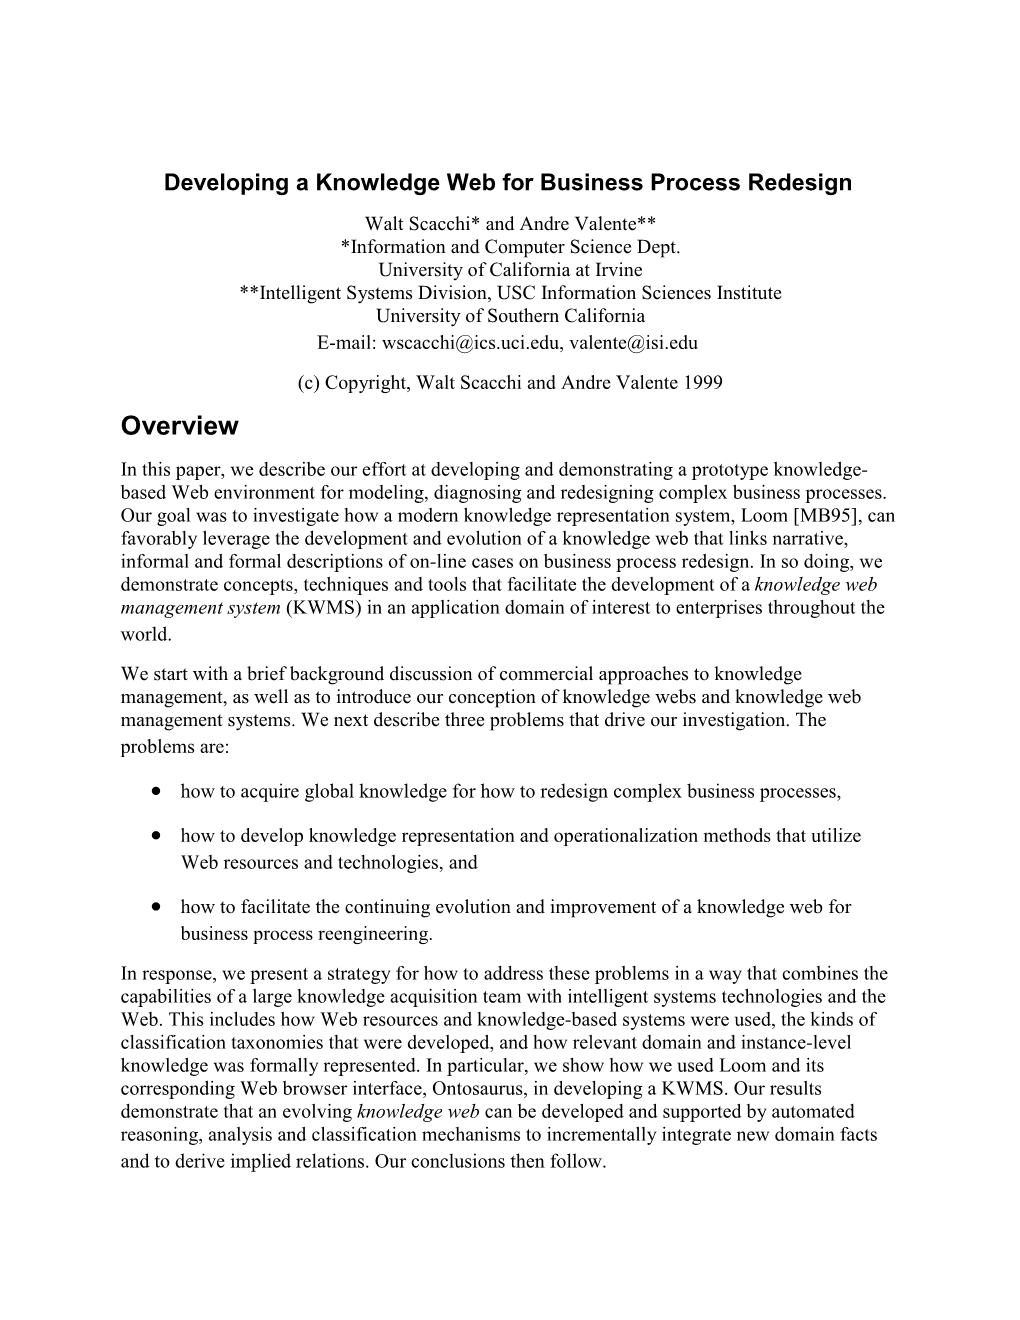 Developing a Knowledge Web for Business Process Redesign Walt Scacchi* and Andre Valente** *Information and Computer Science Dept